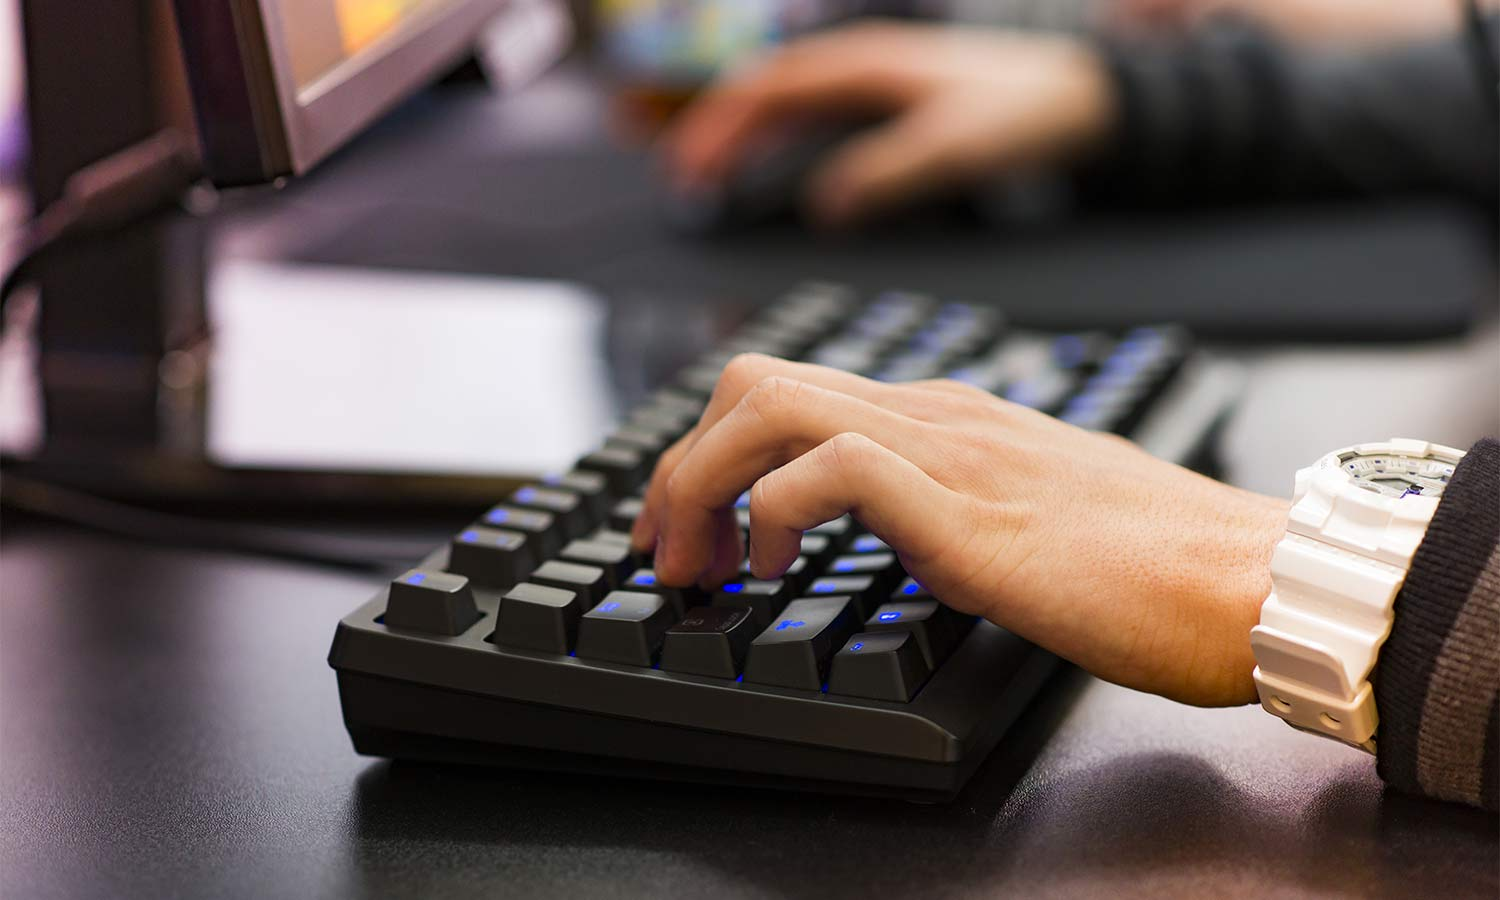 Once the gaming keyboard has been put back together, test the keys to check that the switches that you have changed are working properly.